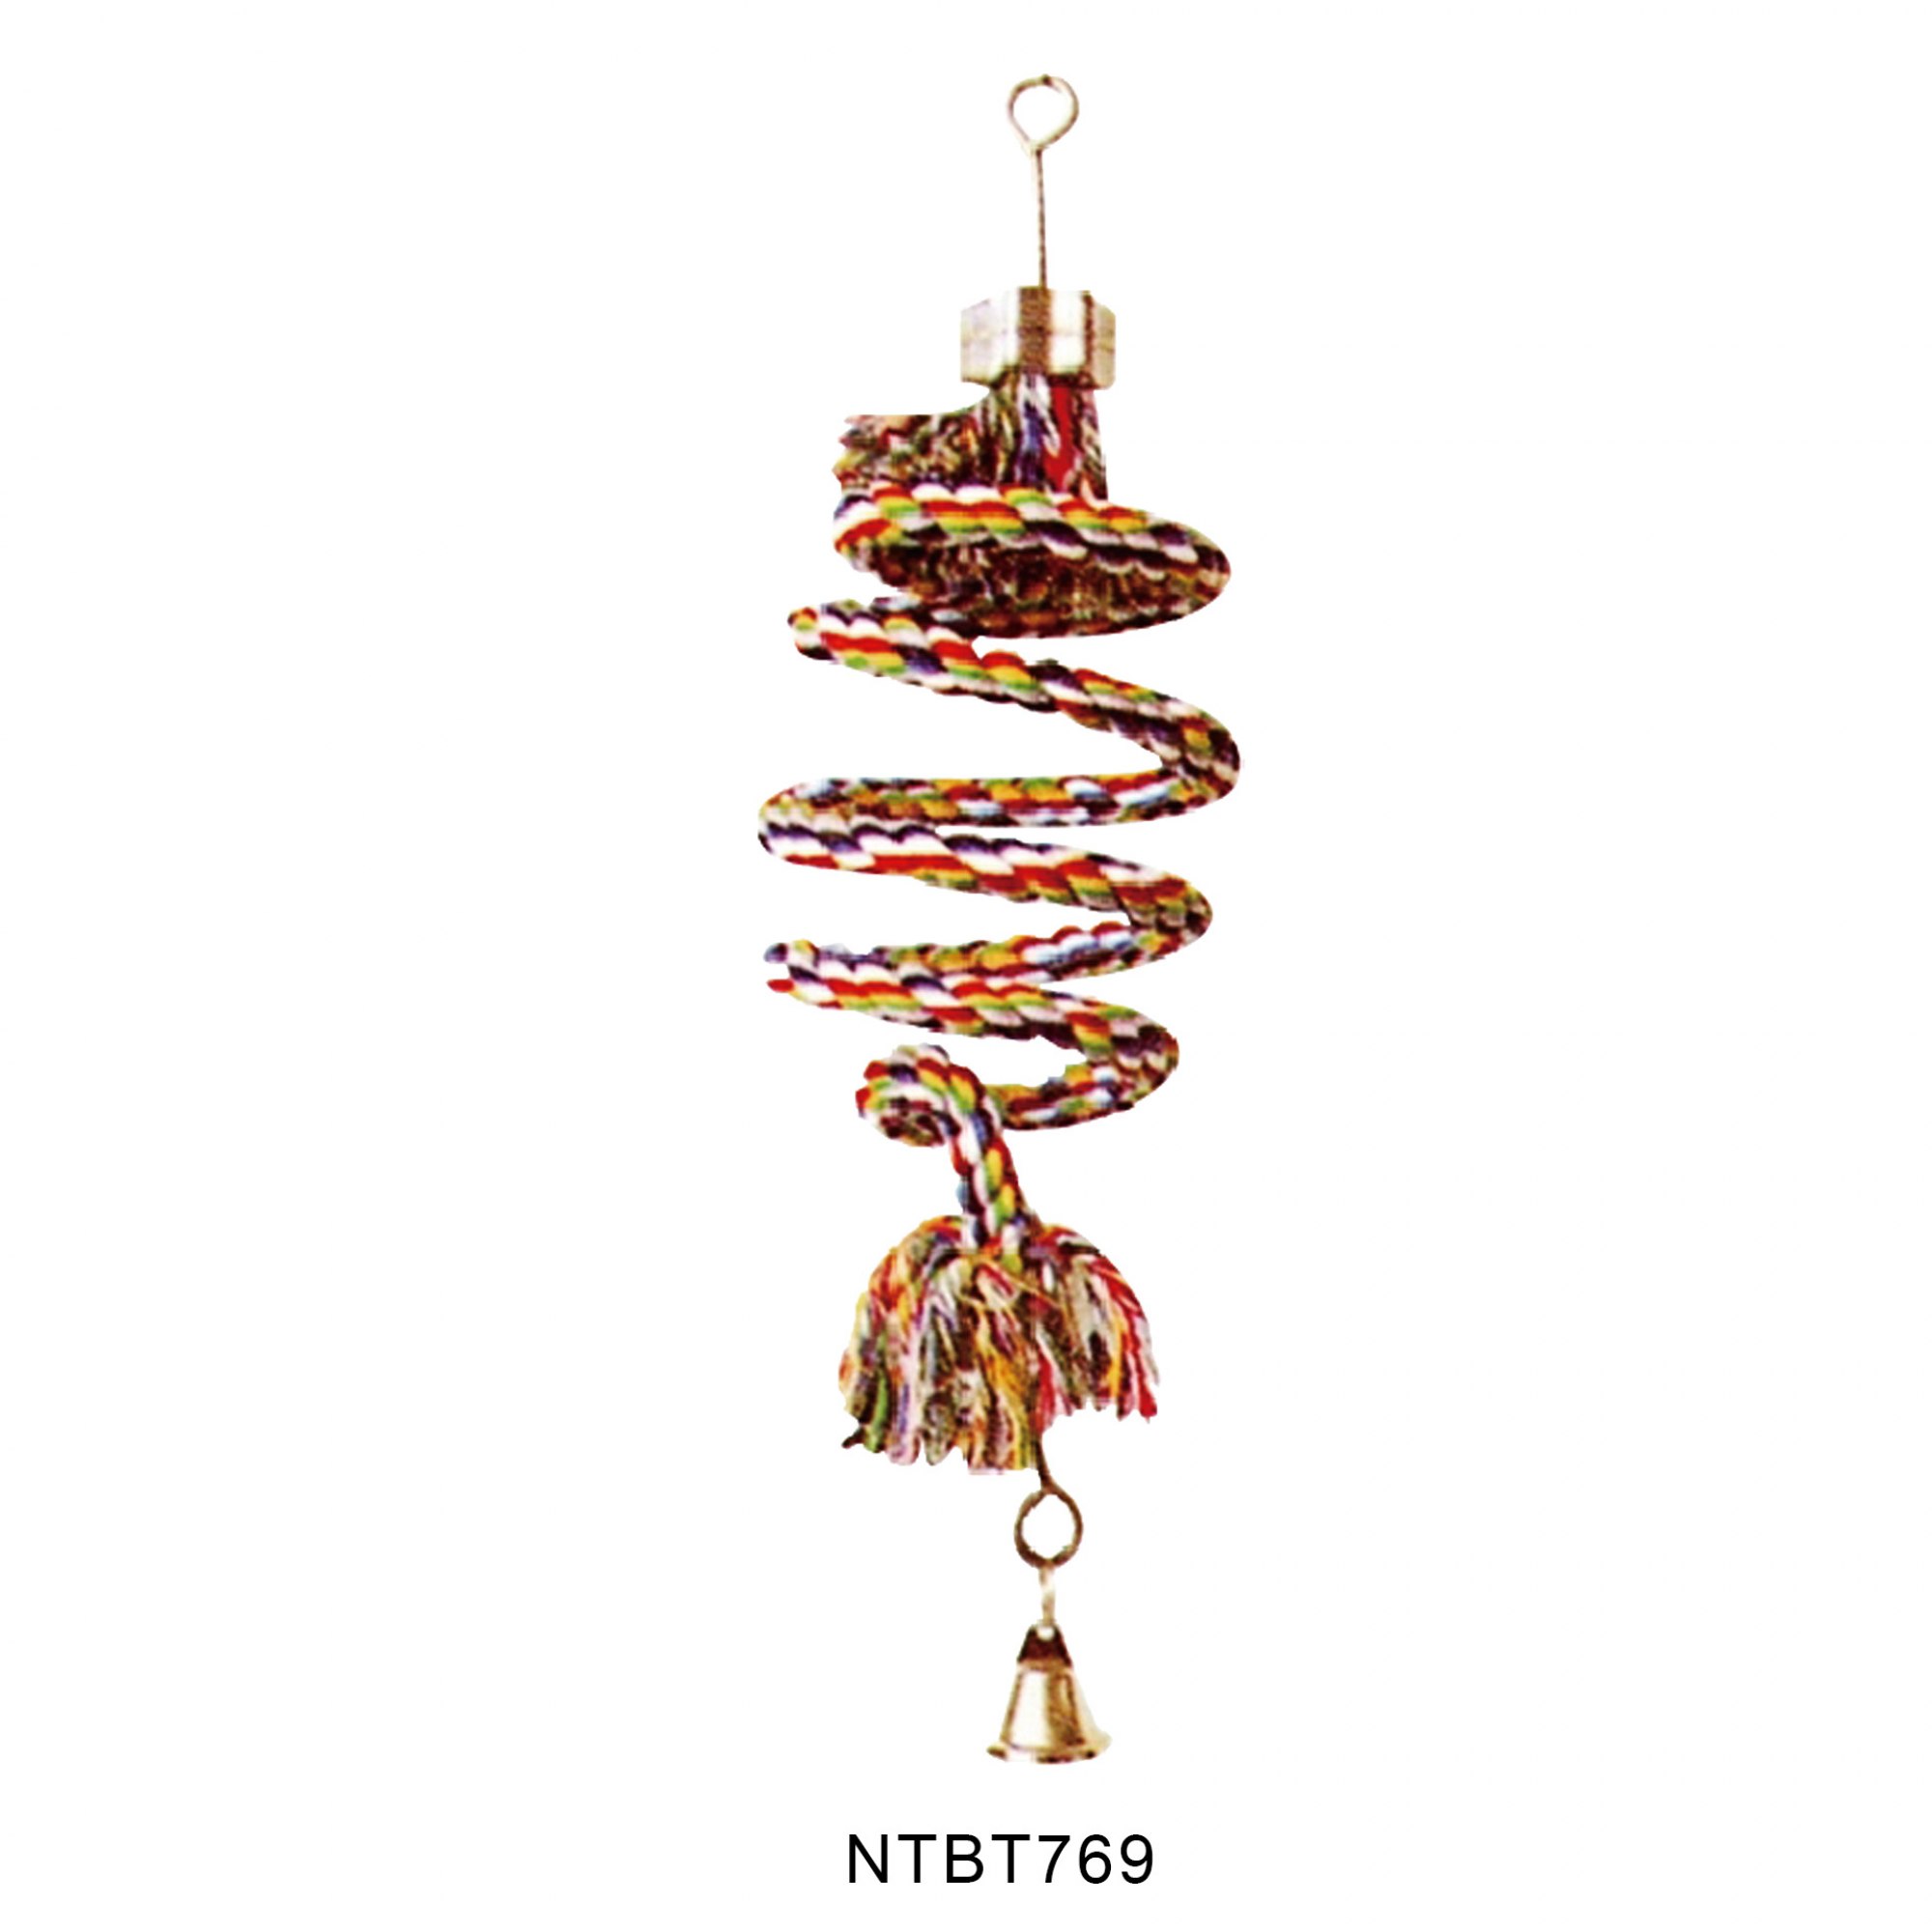 OPSP - 769 - Spiral Colored Rope Bird Toy 16"